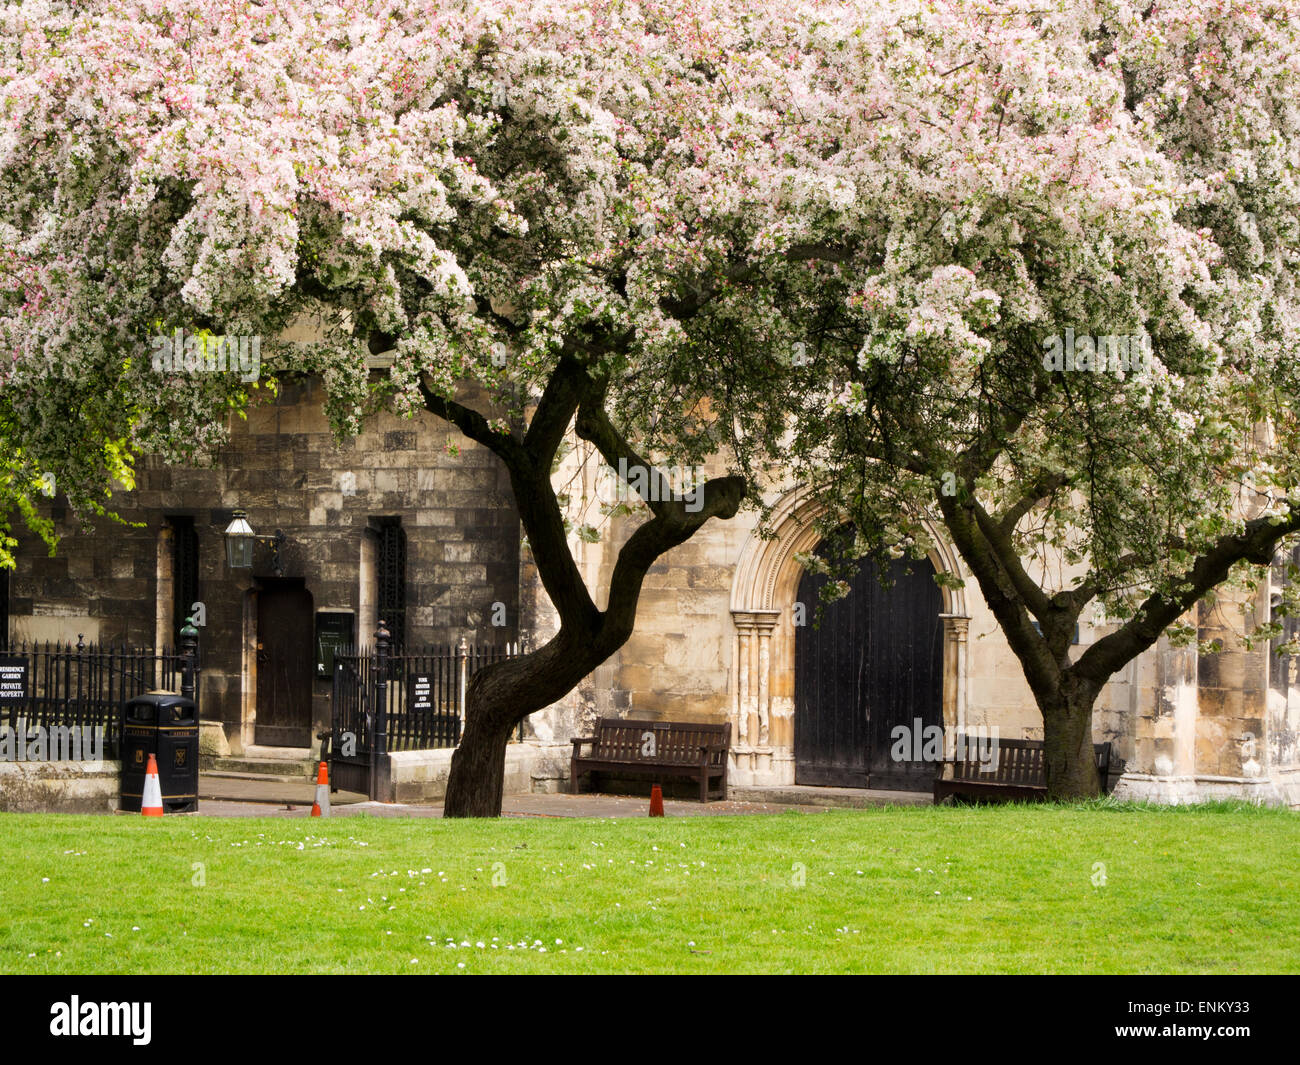 Spring Blossom at York Minster Library in the Old Palace Deans Park York Yorkshire England Stock Photo